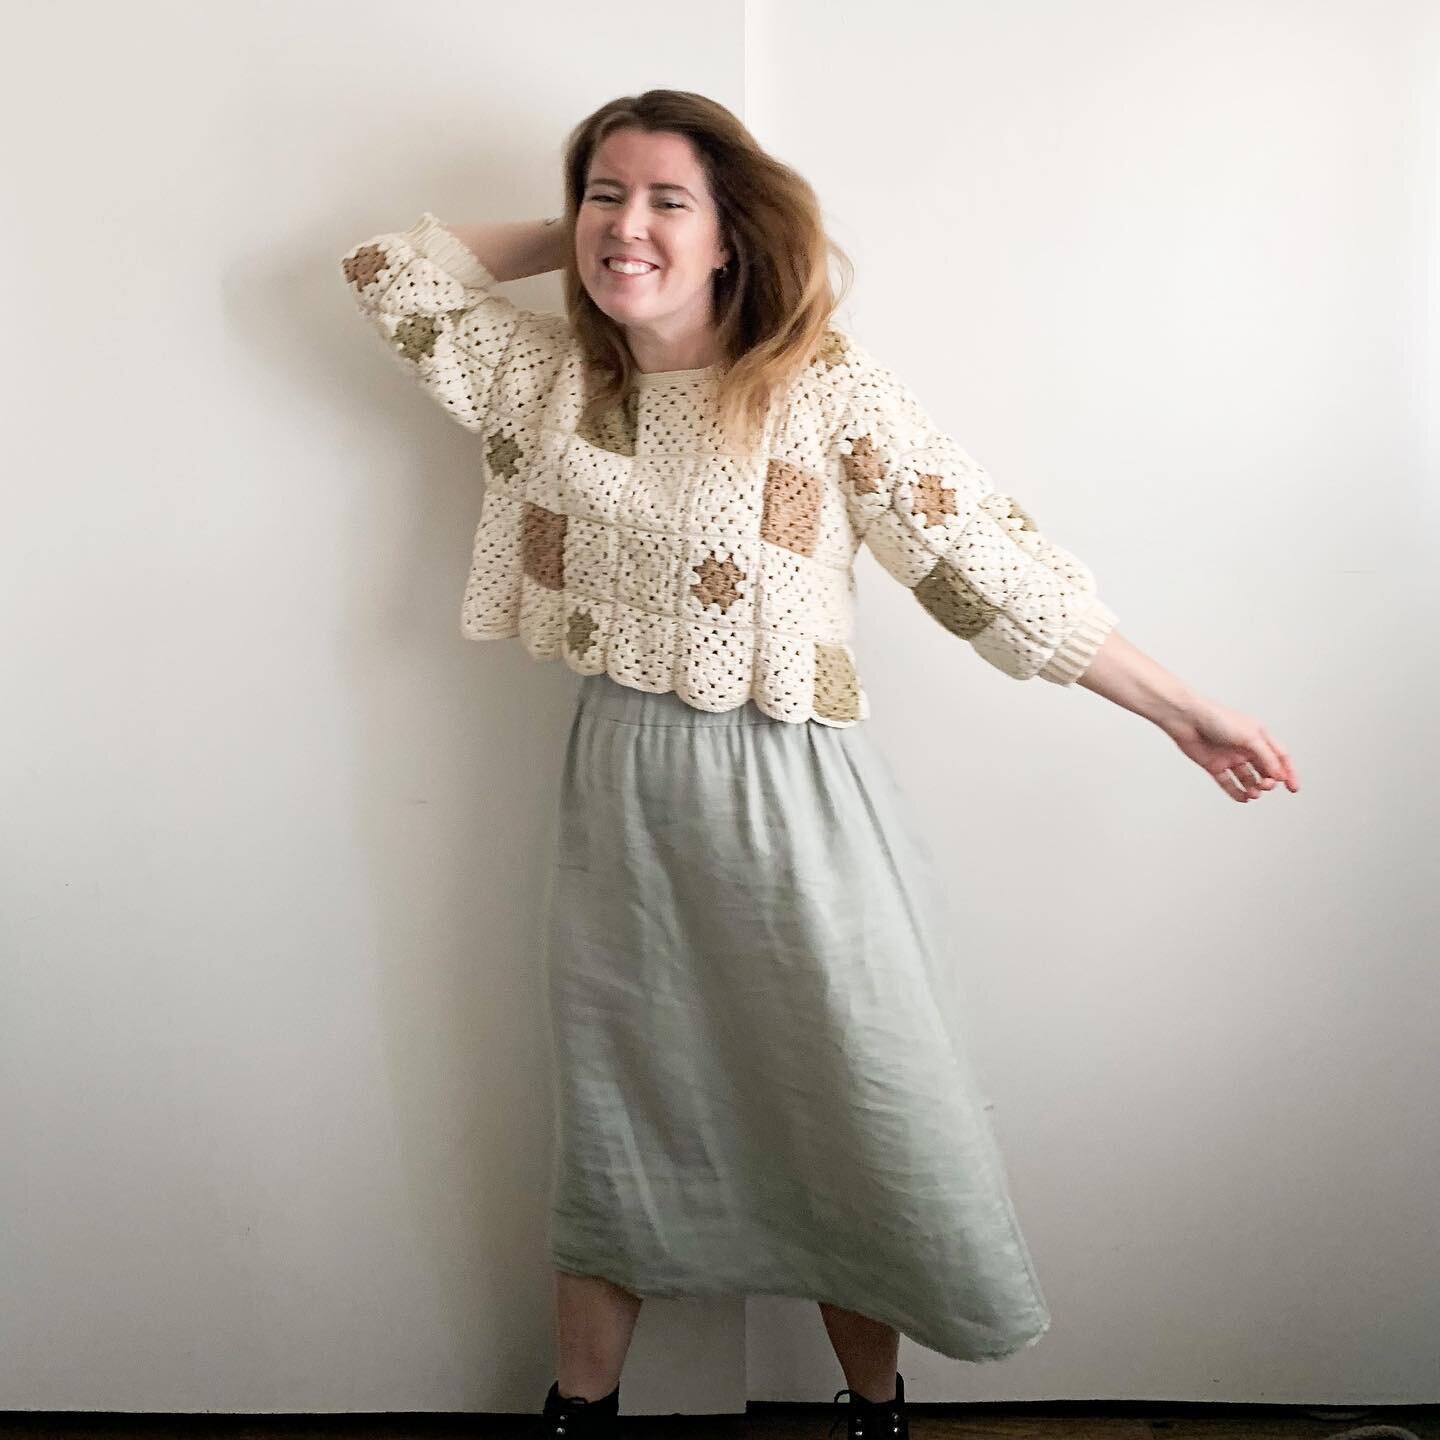 The grief and the joy have always existed together. Don&rsquo;t deny yourself either one!
Wearing all hand made, all self-drafted, self-designed brings me so much JOY.
There is a tutorial for this sweater on my blog!
#crochet #instacrochet #crocheter